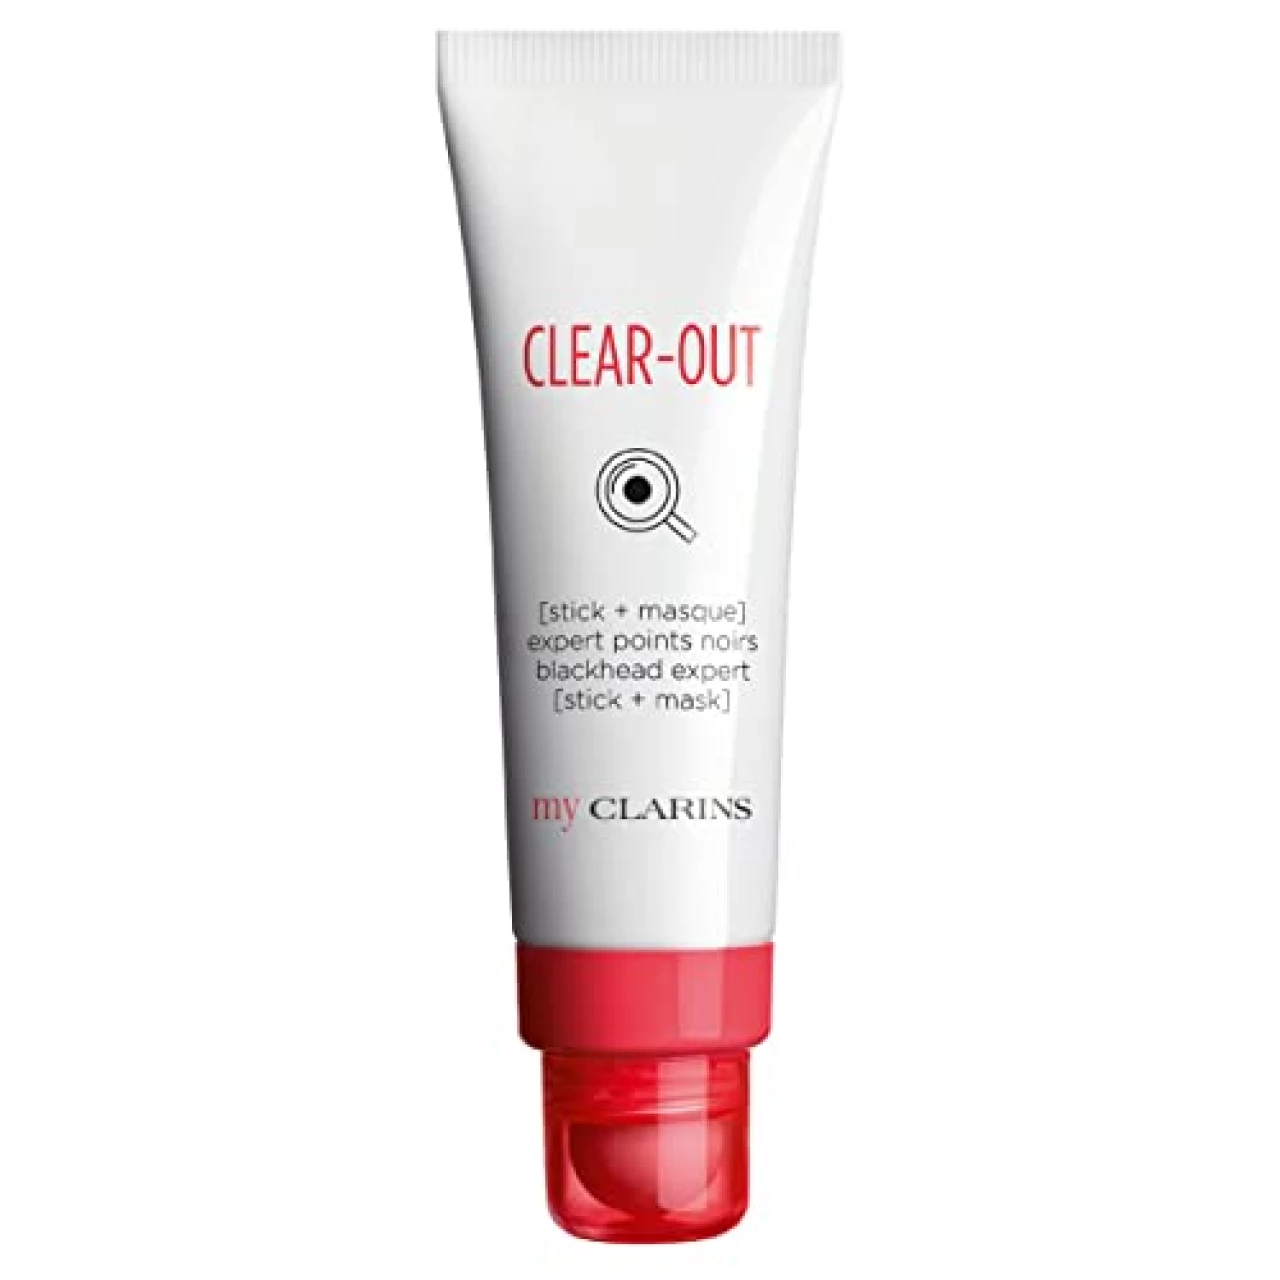 Clarins CLEAR-OUT Blackhead Expert [Stick + Mask] | Award-Winning 2-In-1 Purifying Mask and Exfoliating Stick |Targets Blackheads and Visibly Minimizes Pores |Mattifies,Reduces Shine and Refreshes